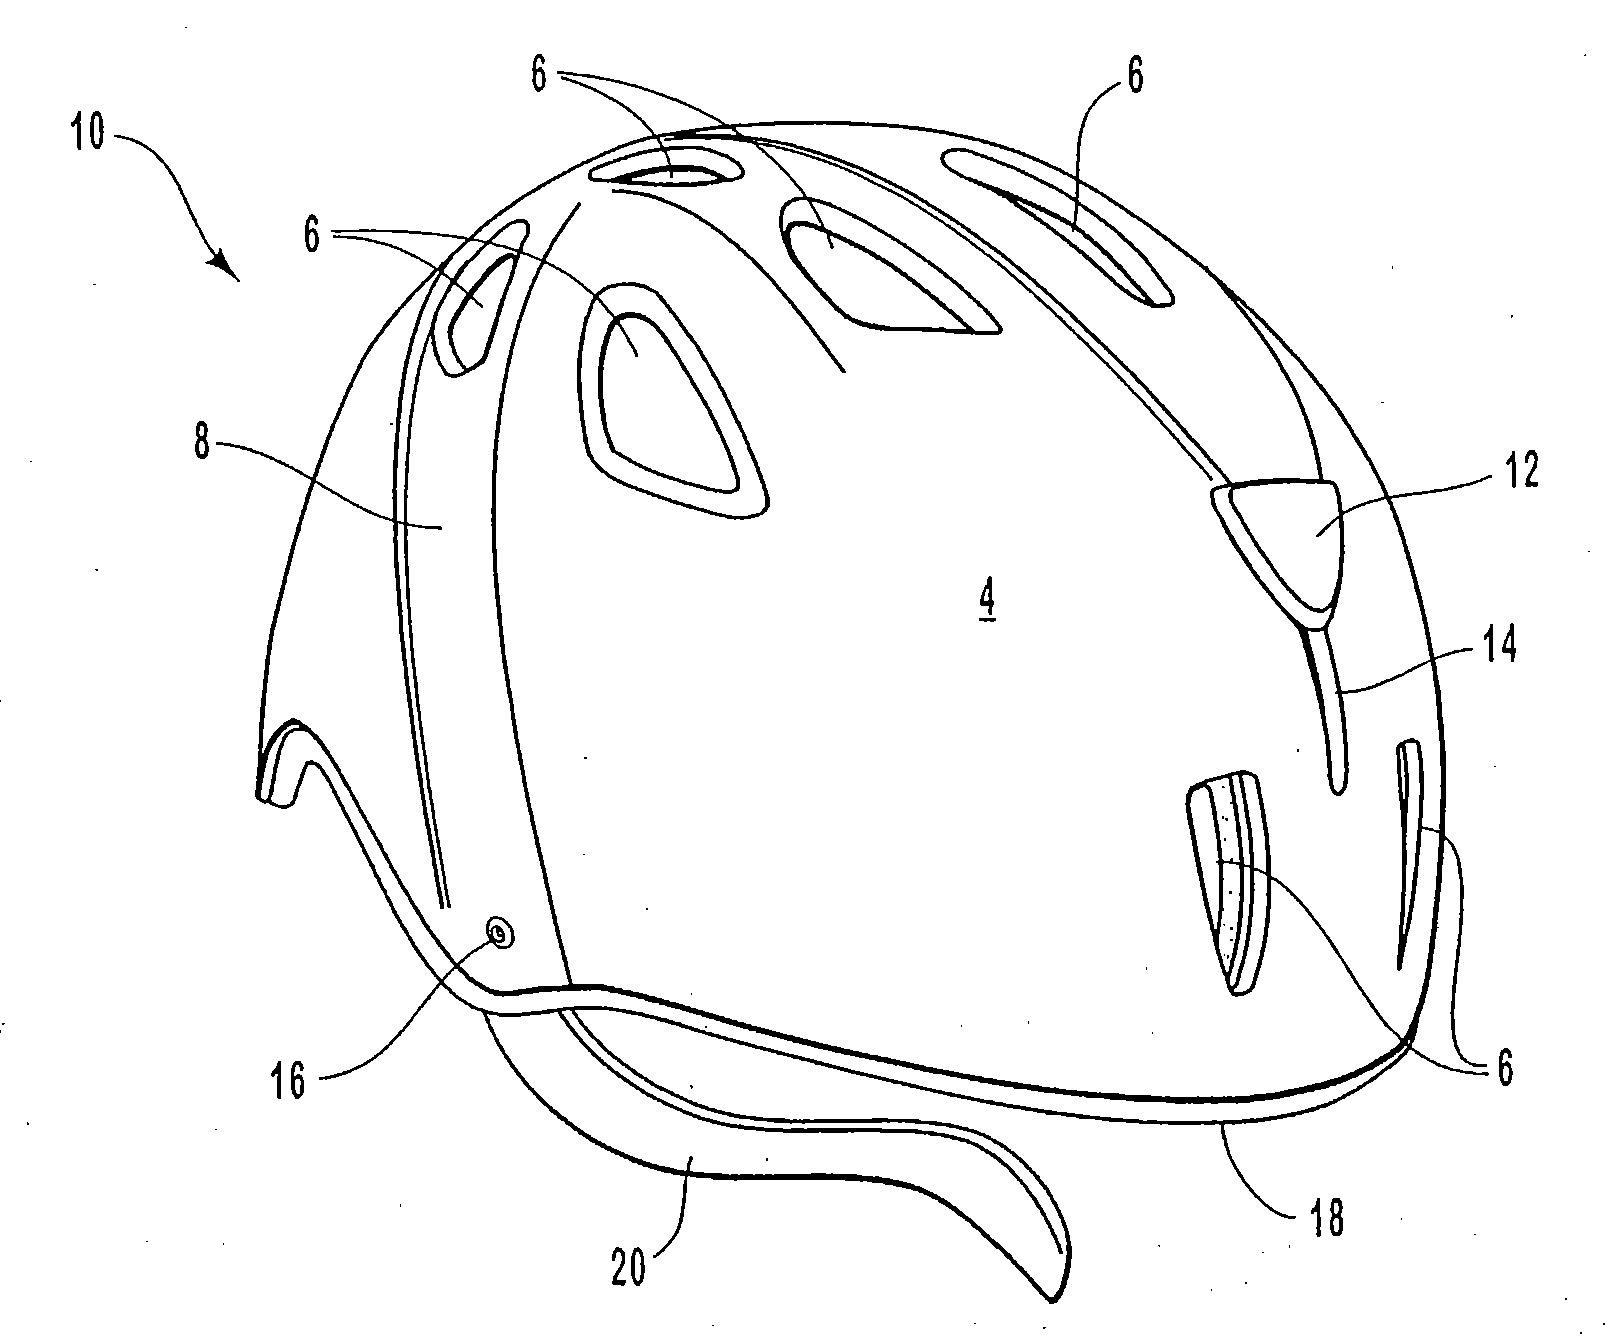 In-Mold Protective Helmet Having Integrated Ventilation System